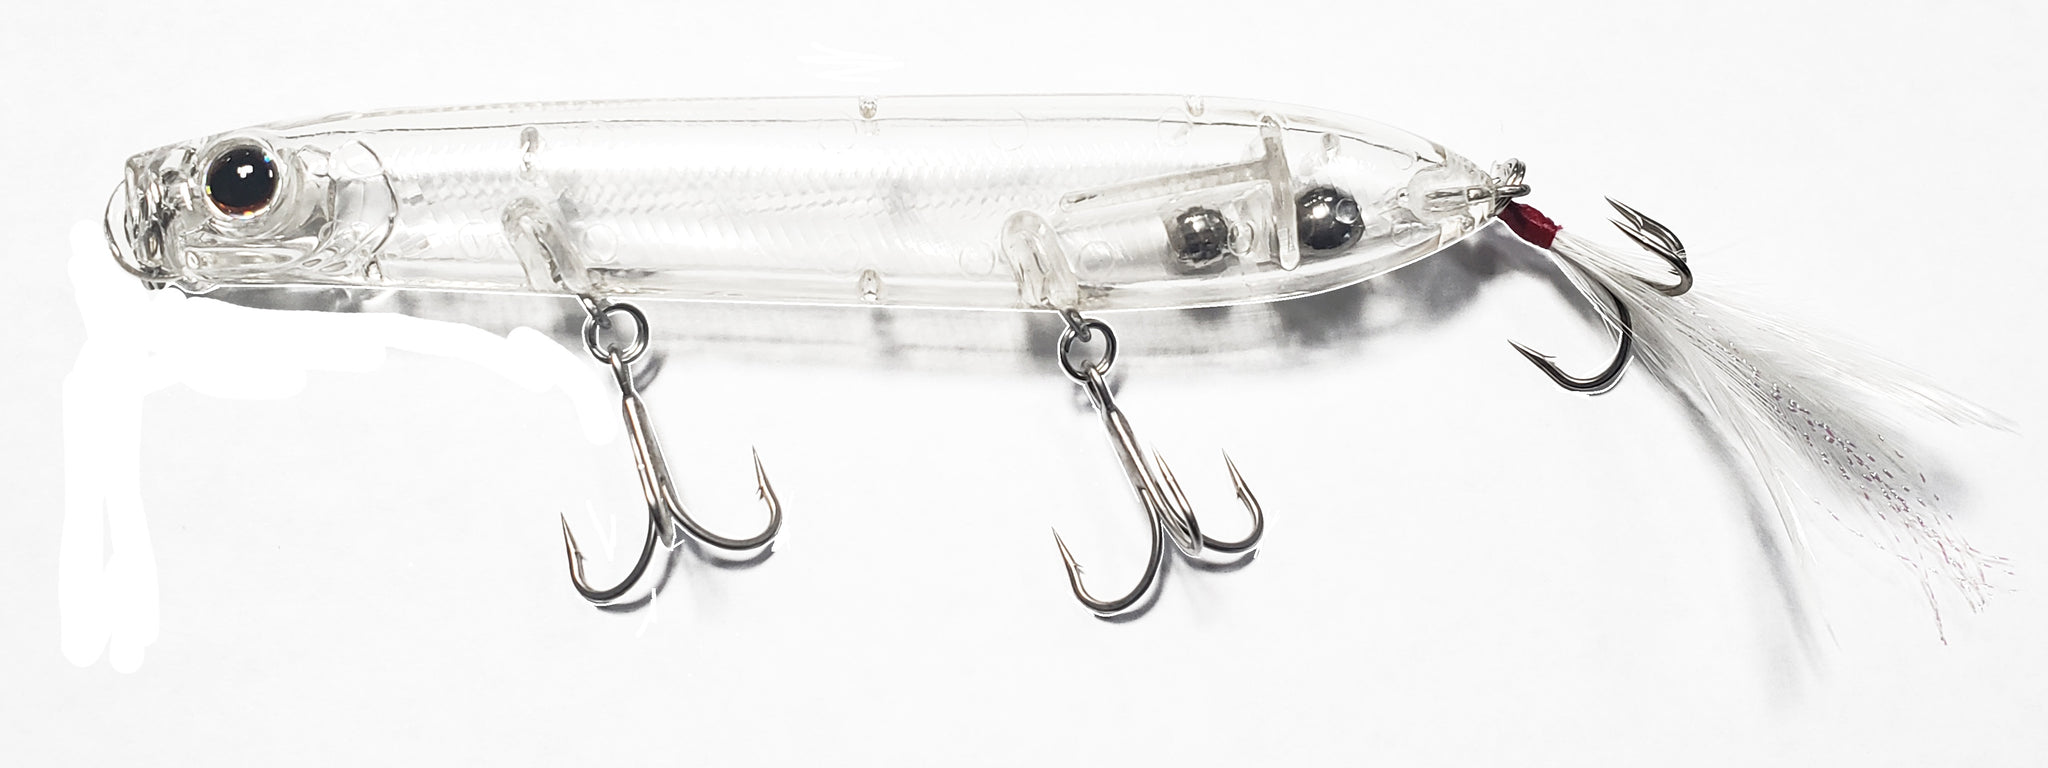 SB Topwater – The Hook Up Tackle